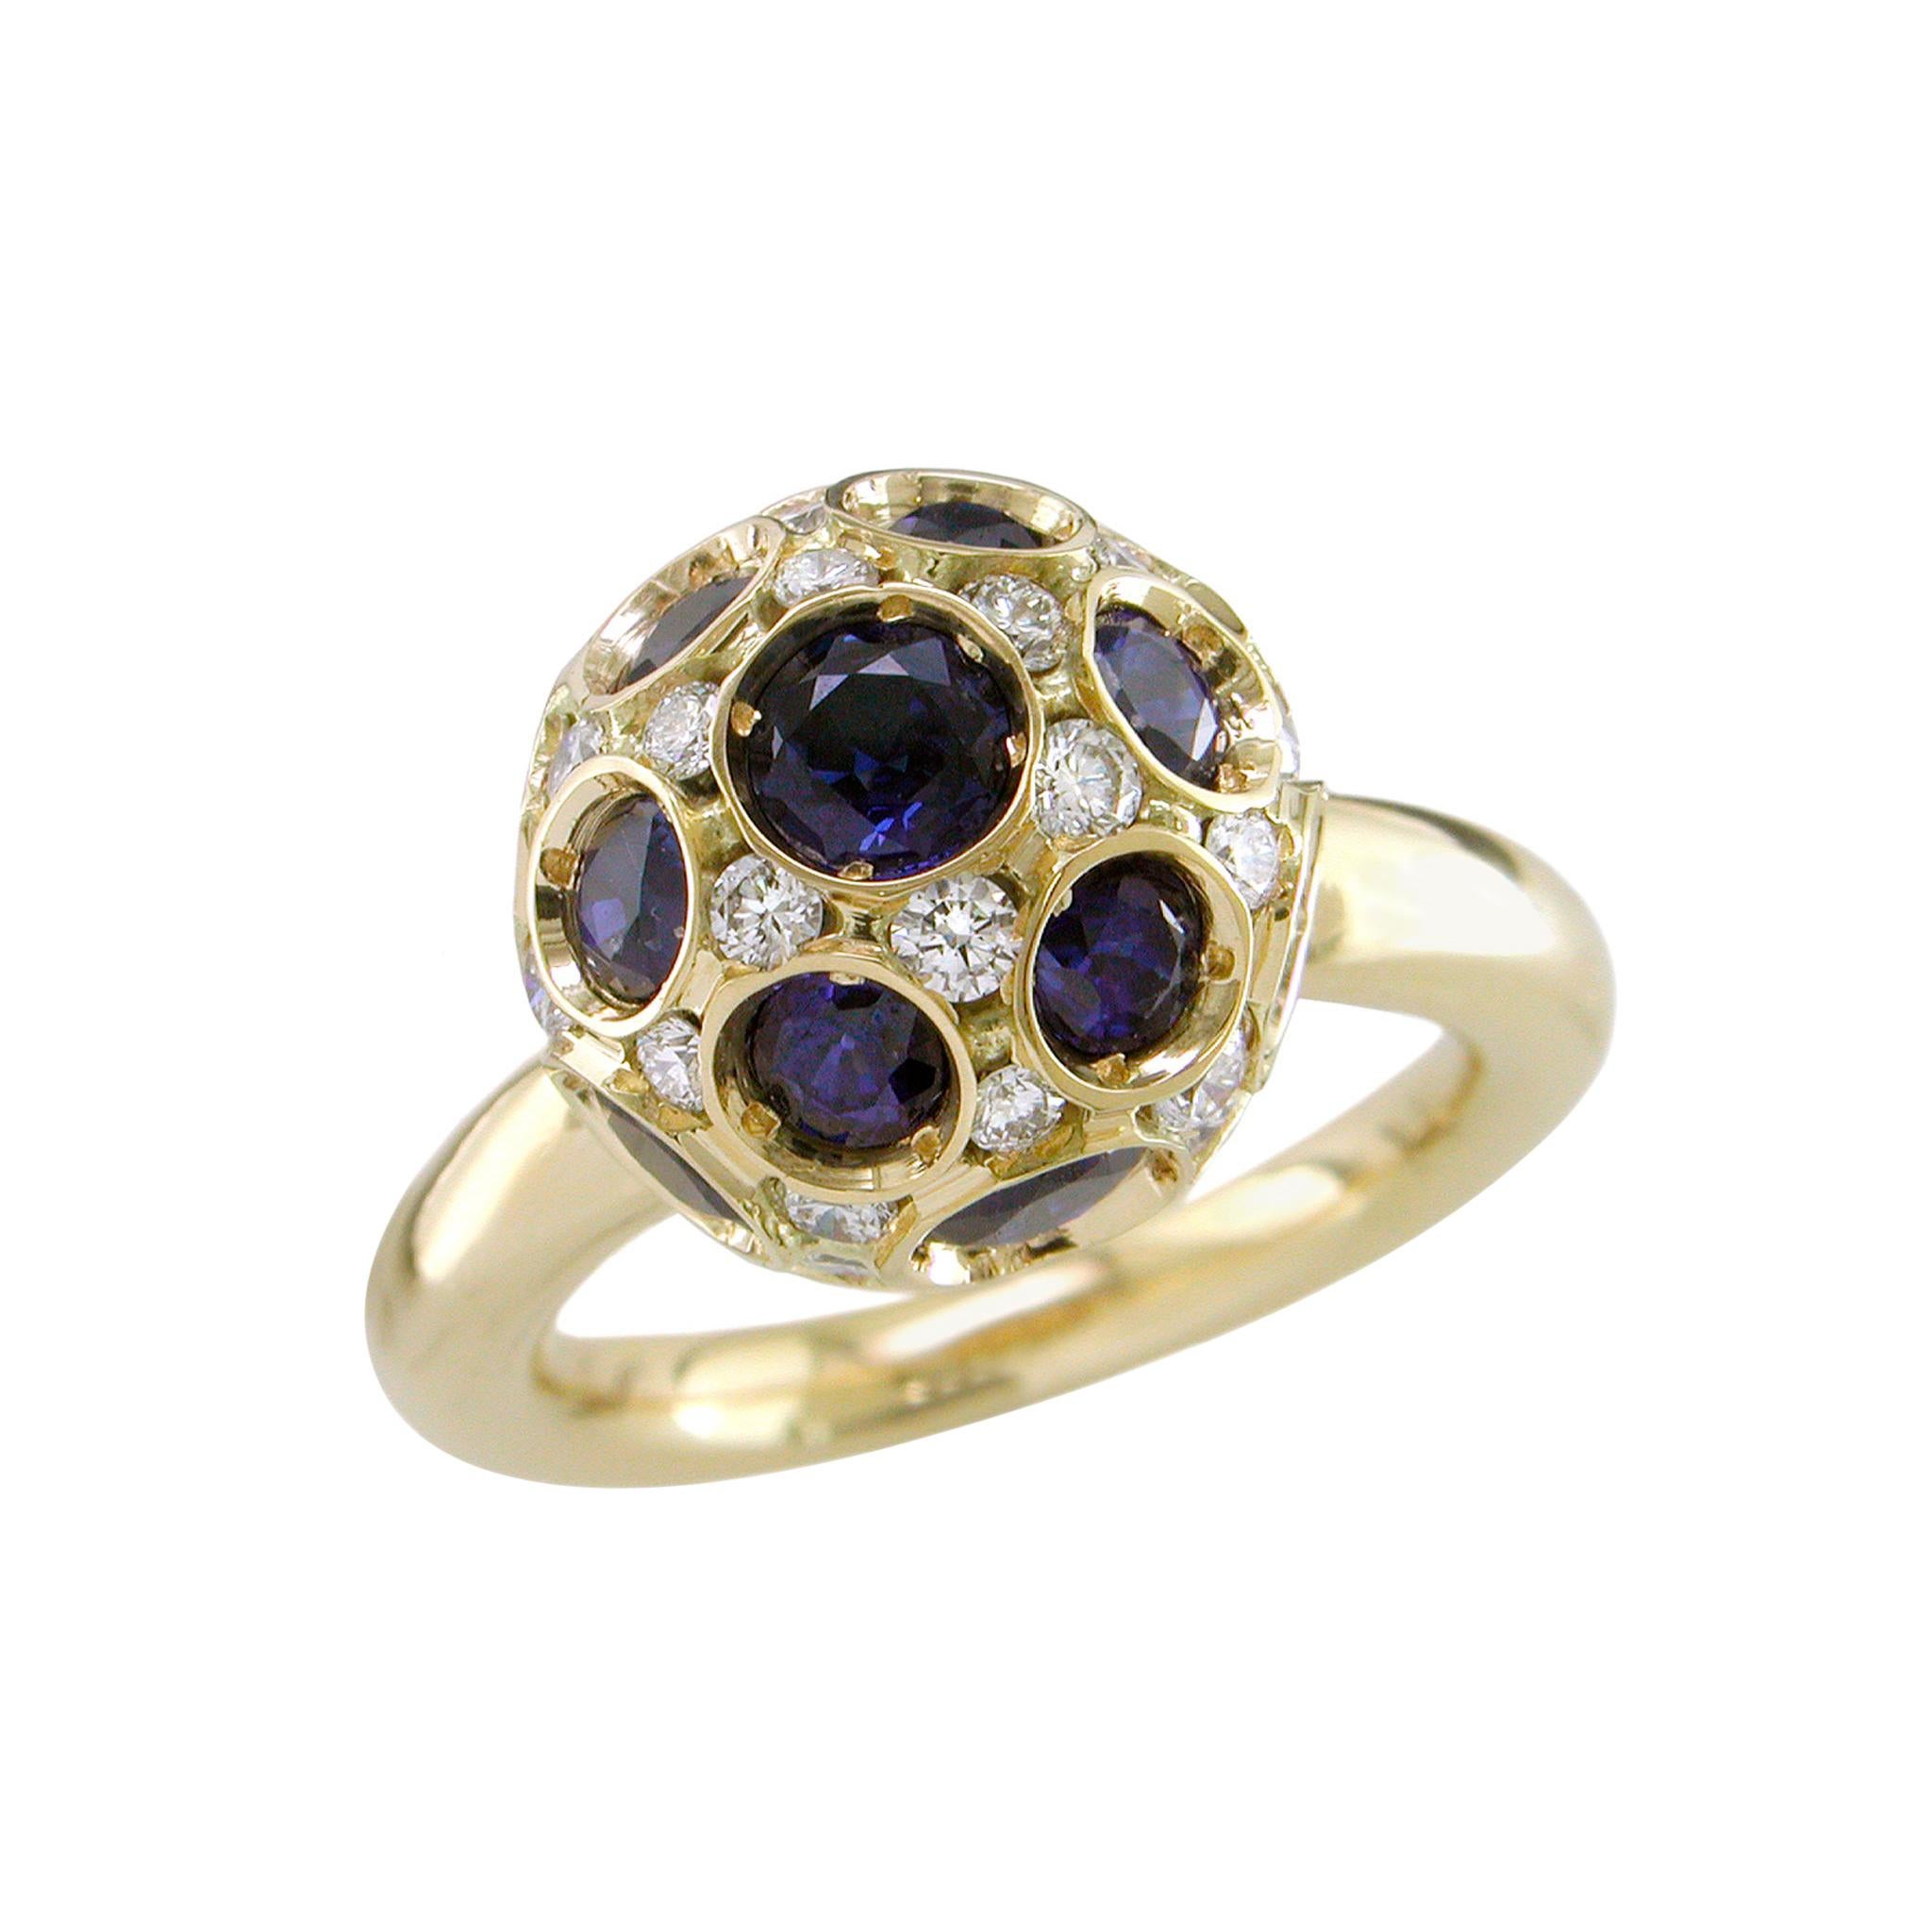 Hammerman Brothers Diamond and Sapphire Ball Ring For Sale